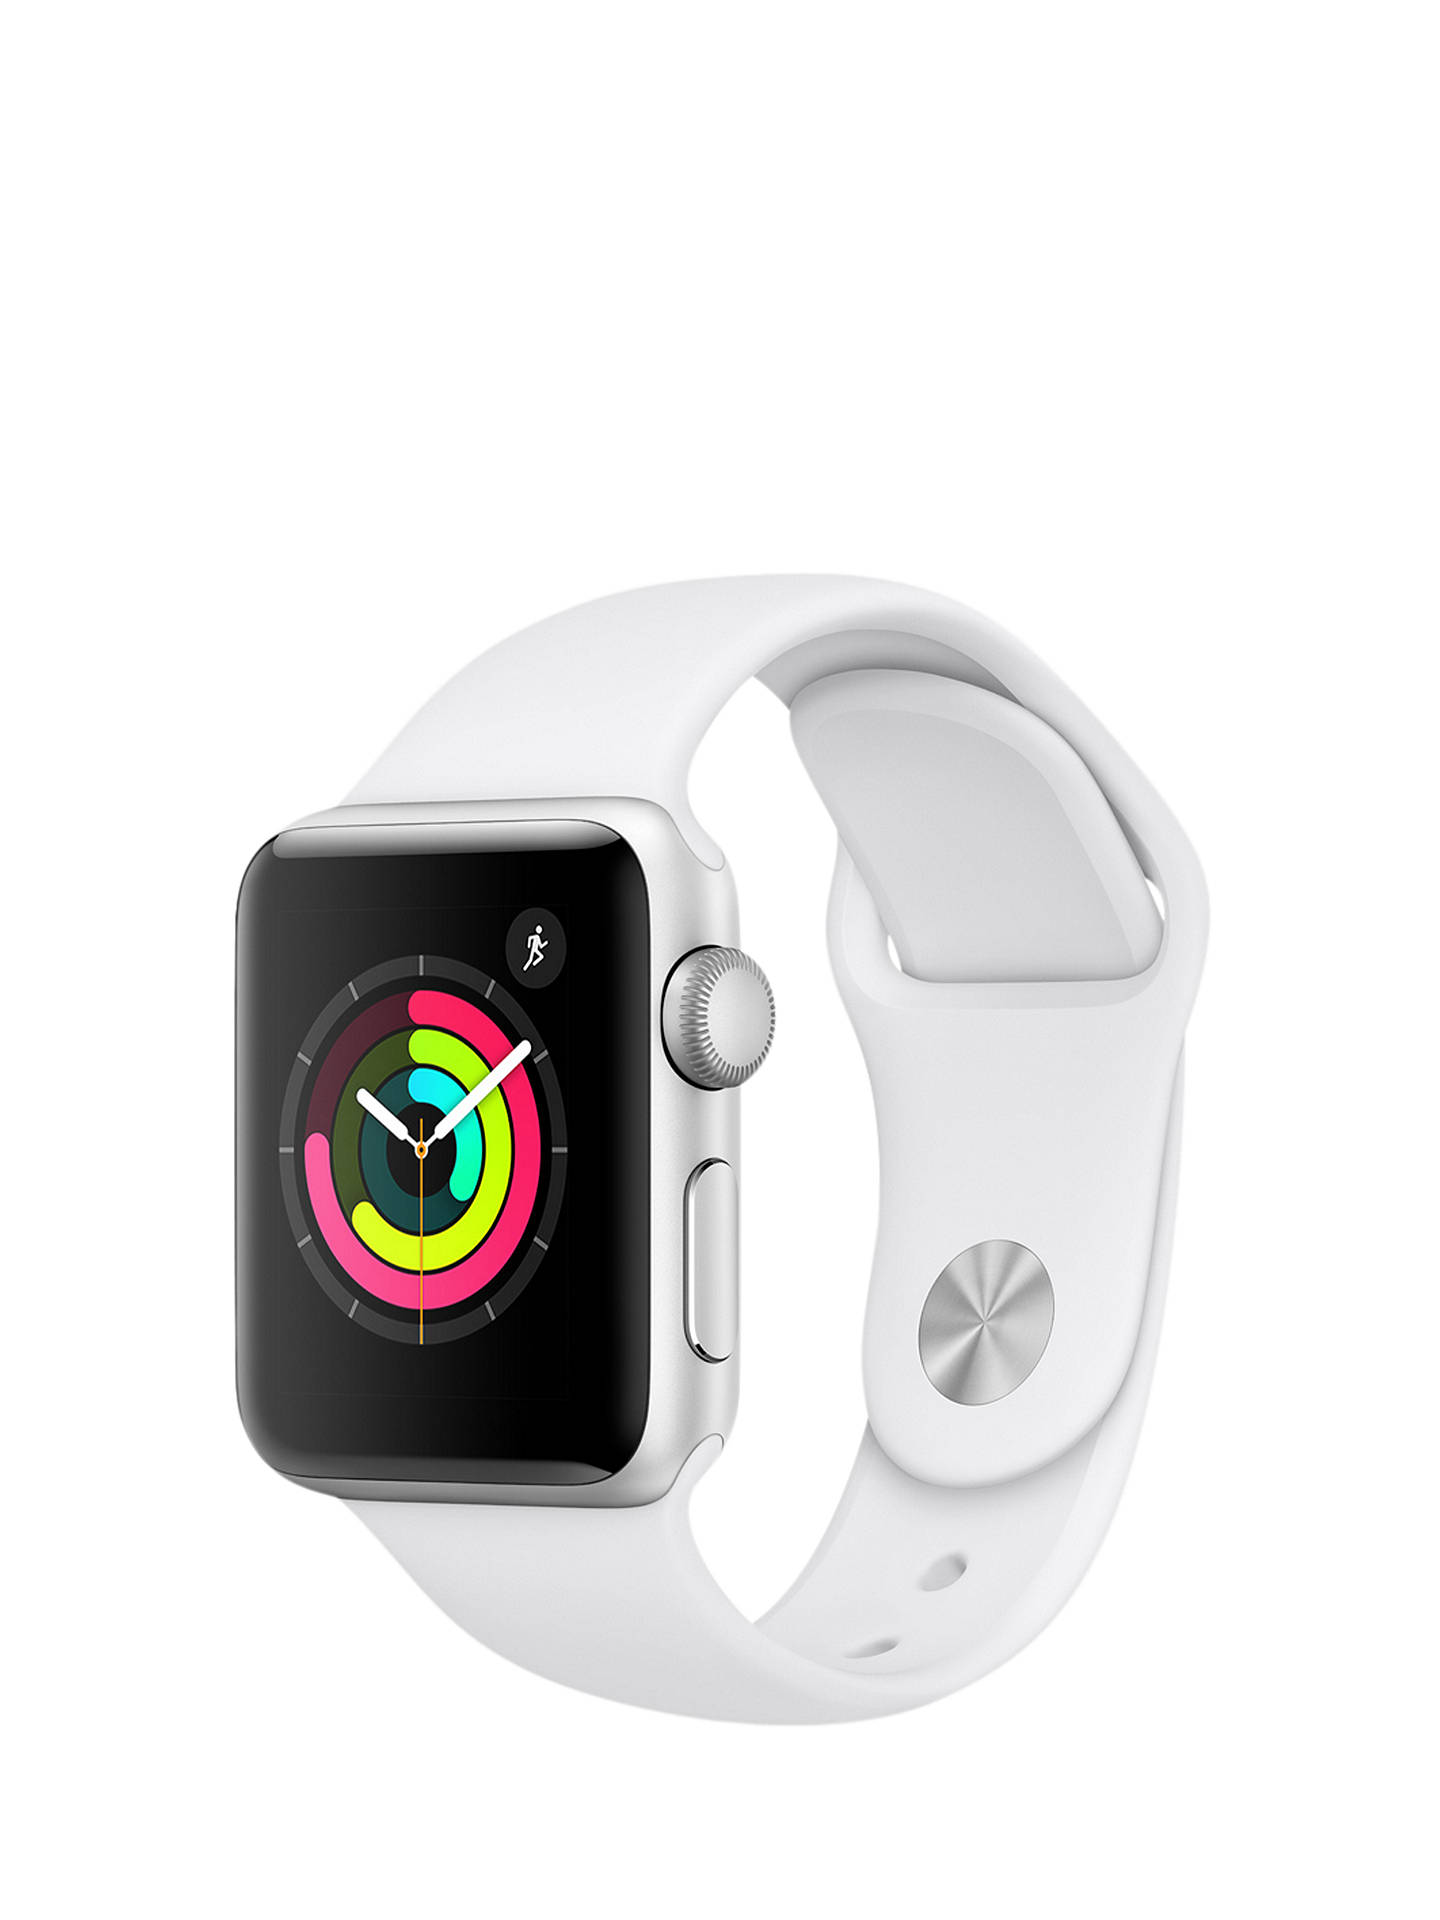 Apple Watch Series 3 Gps 38mm Silver Aluminium Case With Sport Band White At John Lewis Partners